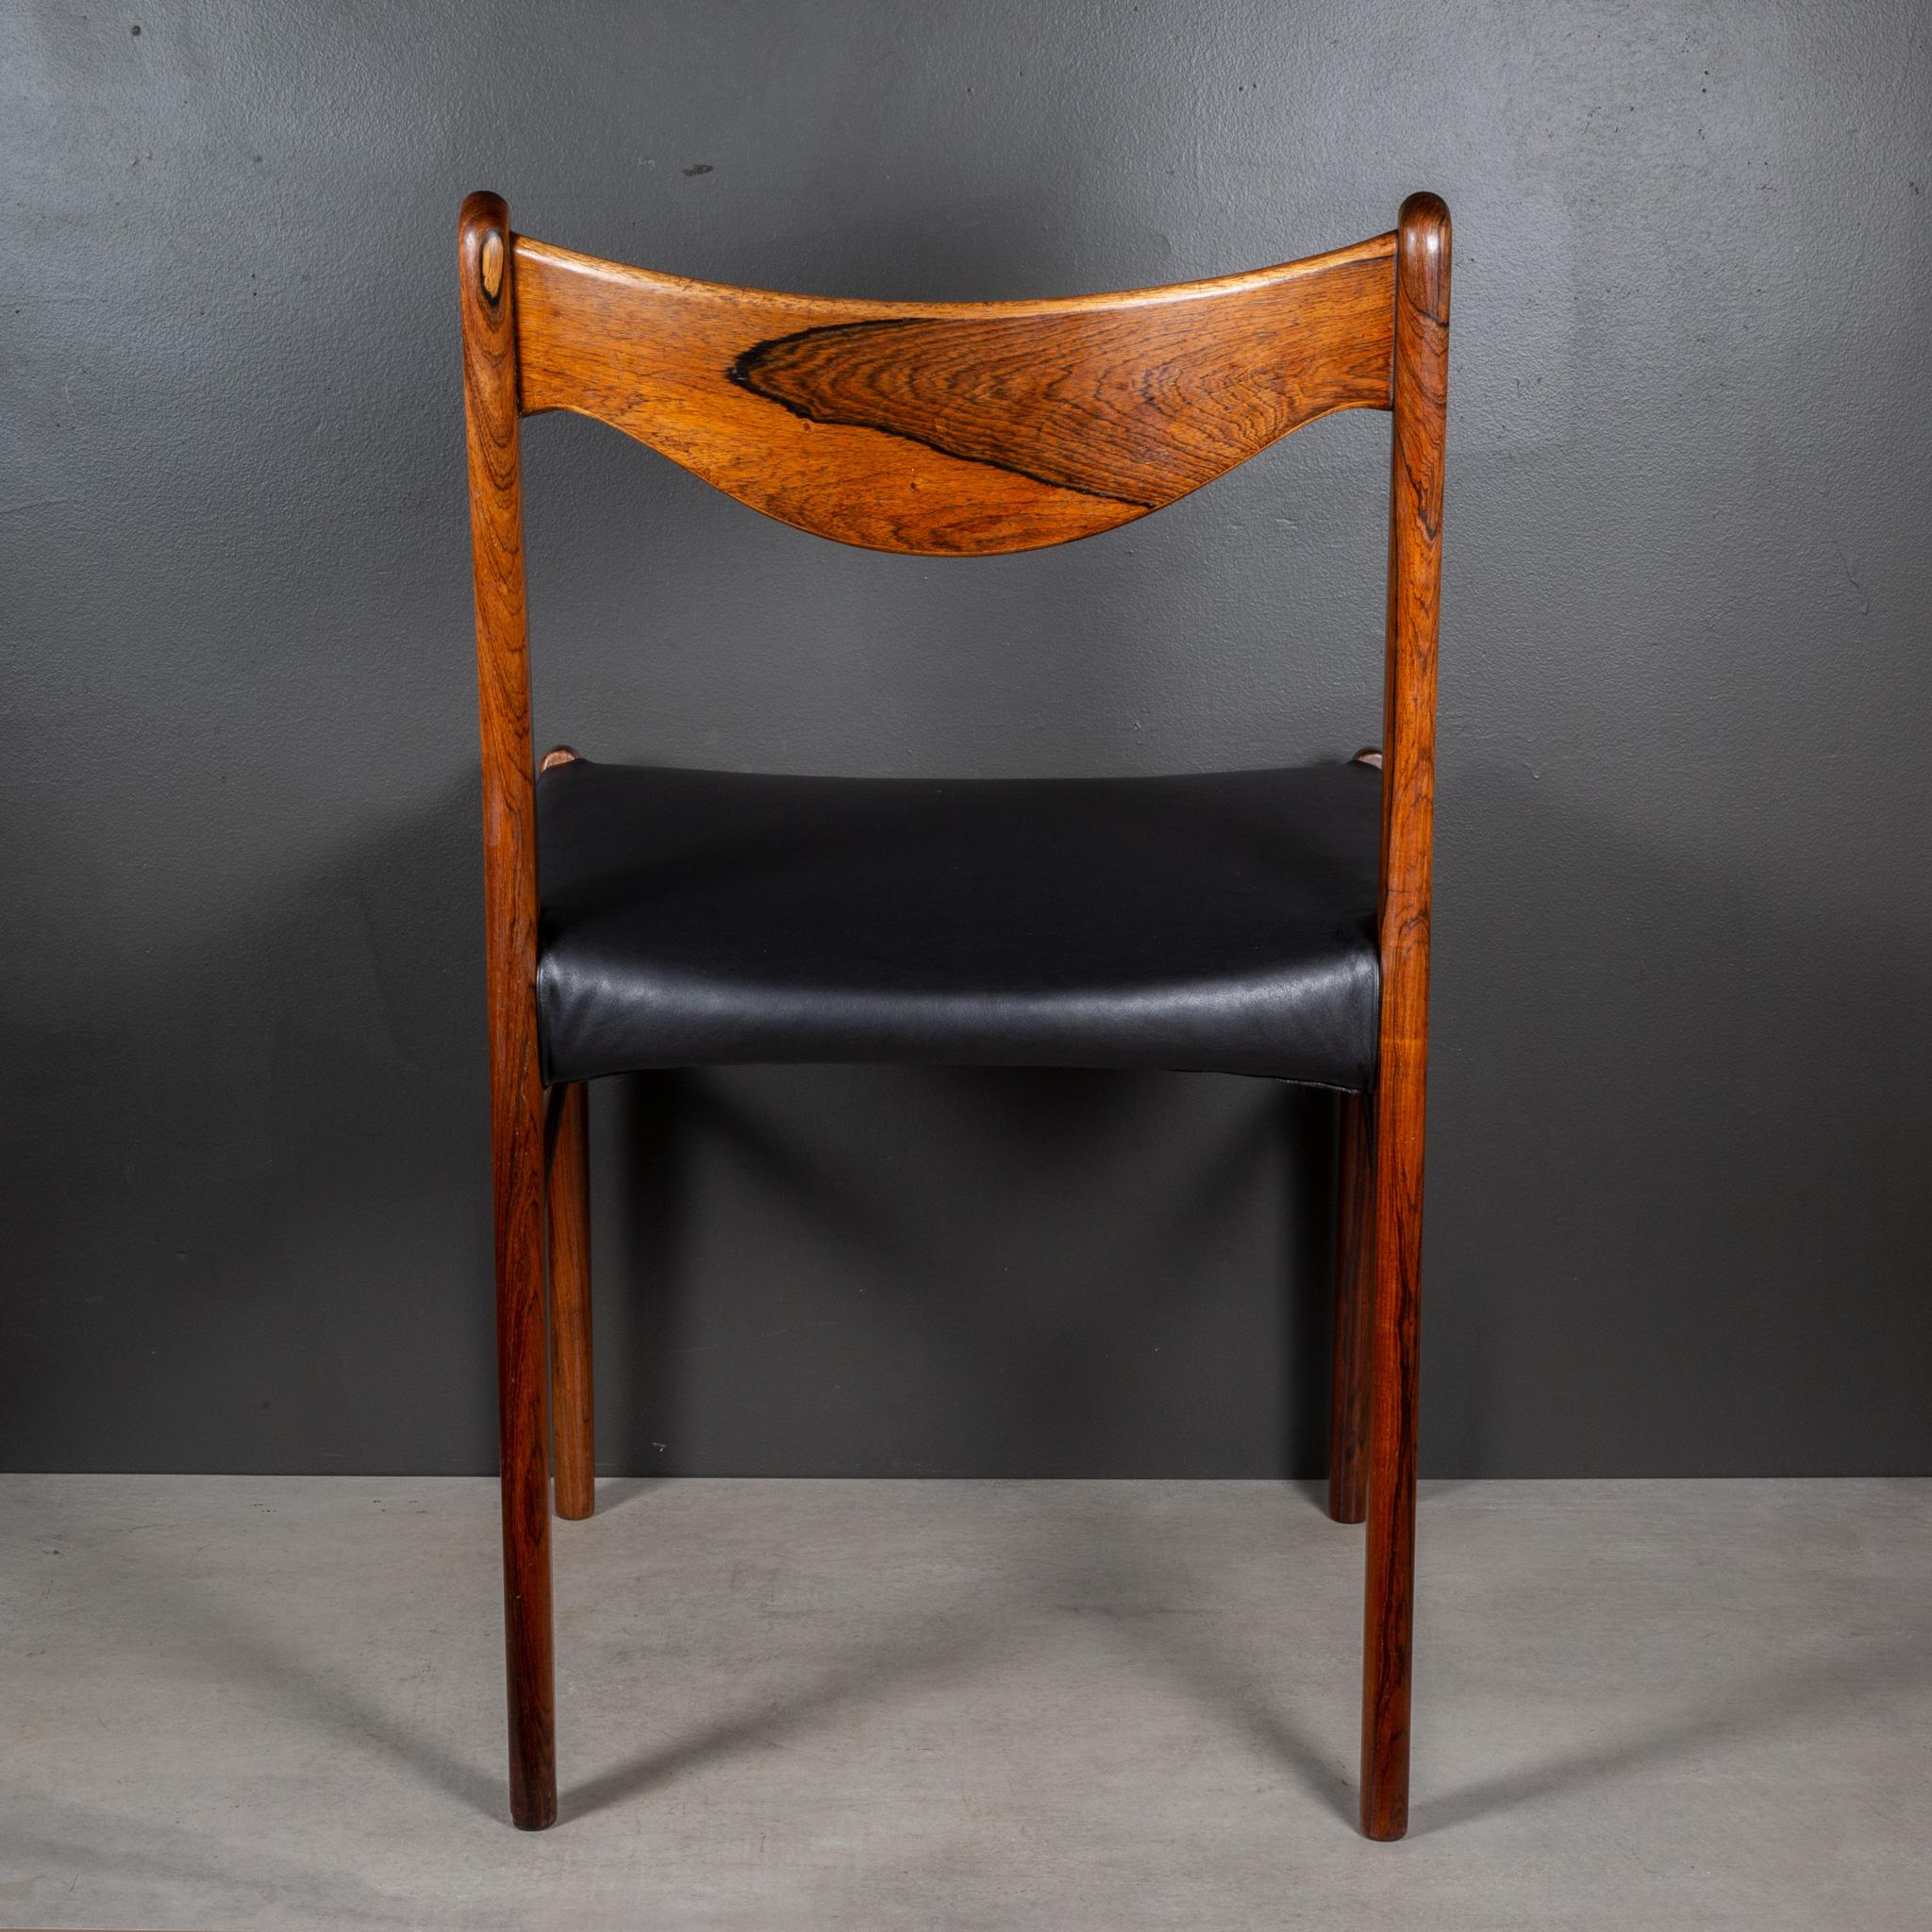 Arne Wahl Iversen Model GS61 Rosewood and Leather Dining Chairs c.1950 For Sale 11